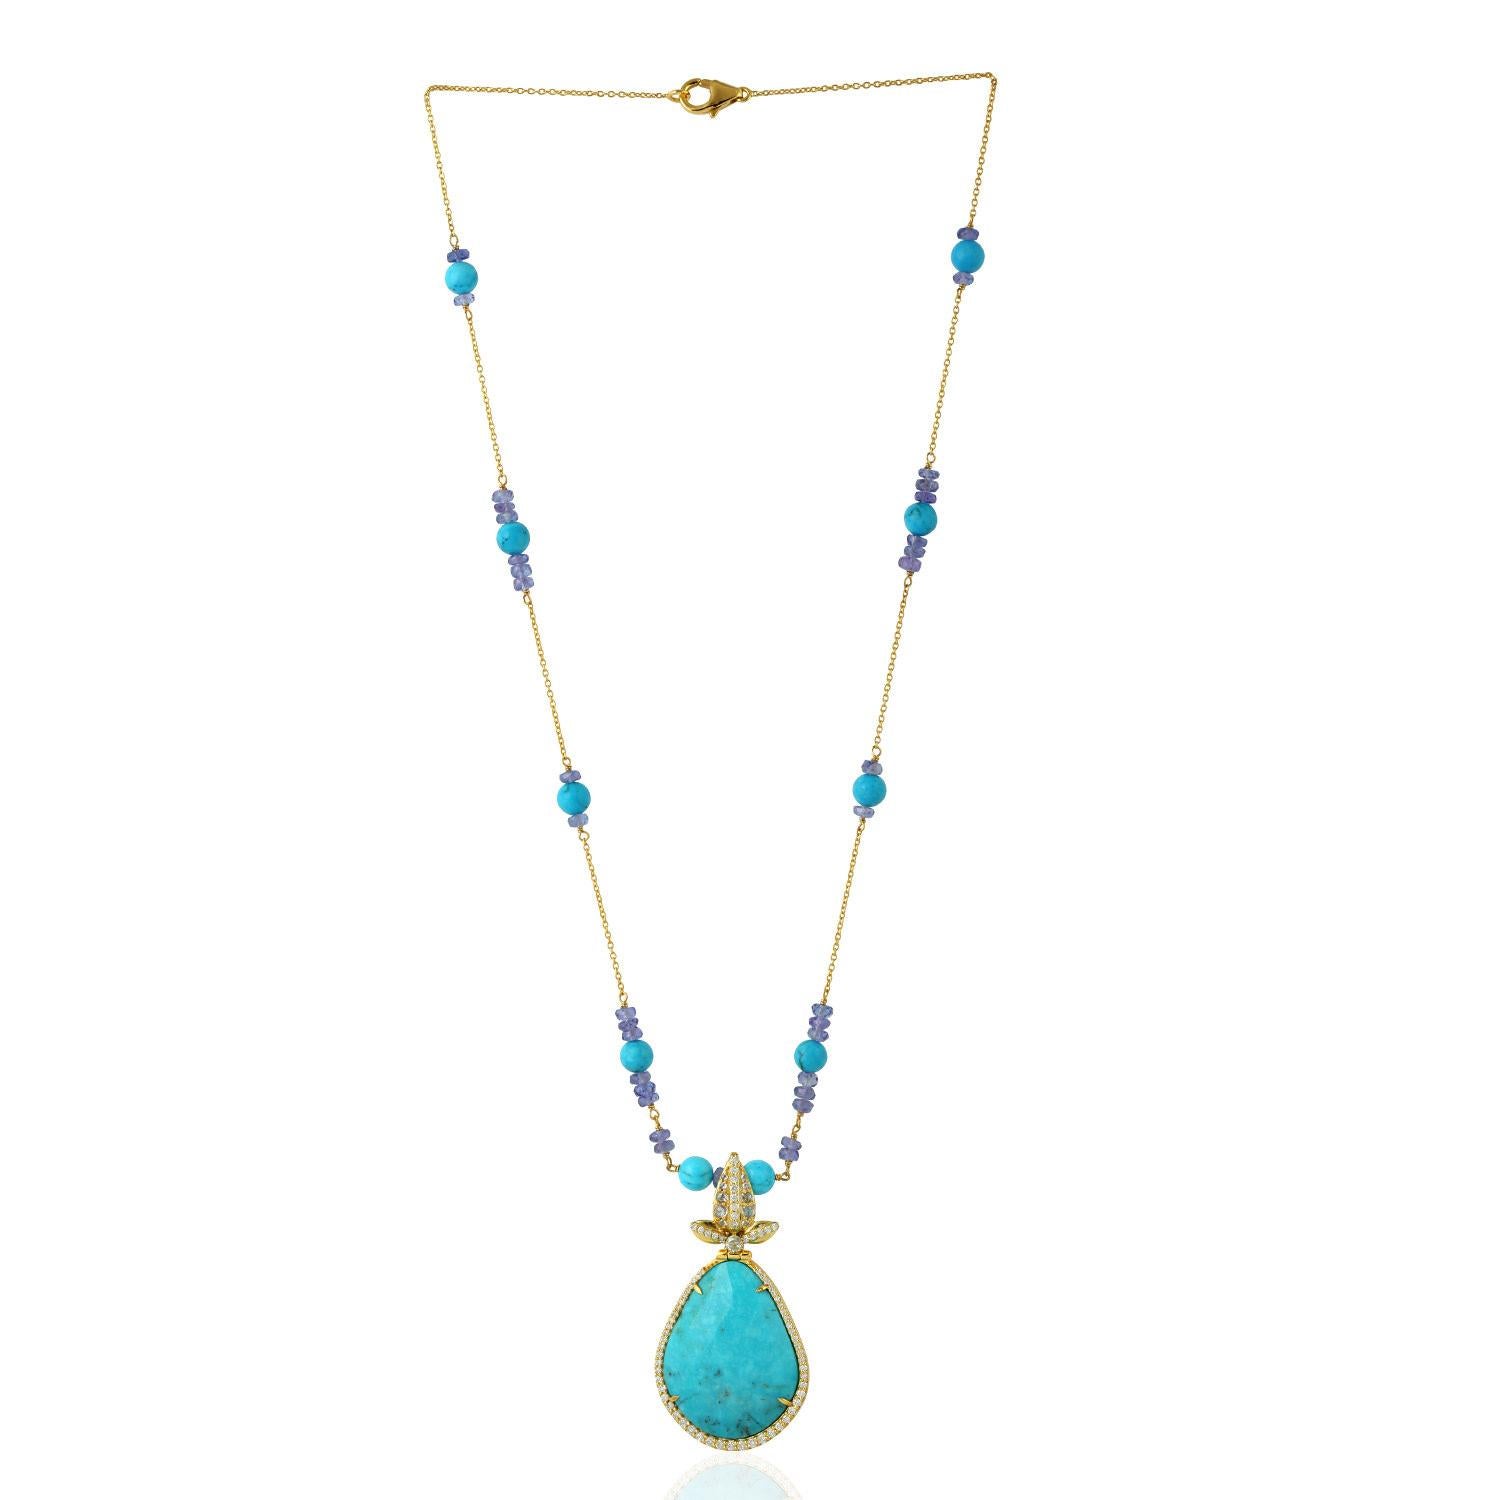 Handcrafted from 14-karat gold, these beautiful necklace is set with 26.72 carats Turquoise, 8.79 carat tanzanite and .78 carats of glimmering diamonds.

FOLLOW  MEGHNA JEWELS storefront to view the latest collection & exclusive pieces.  Meghna